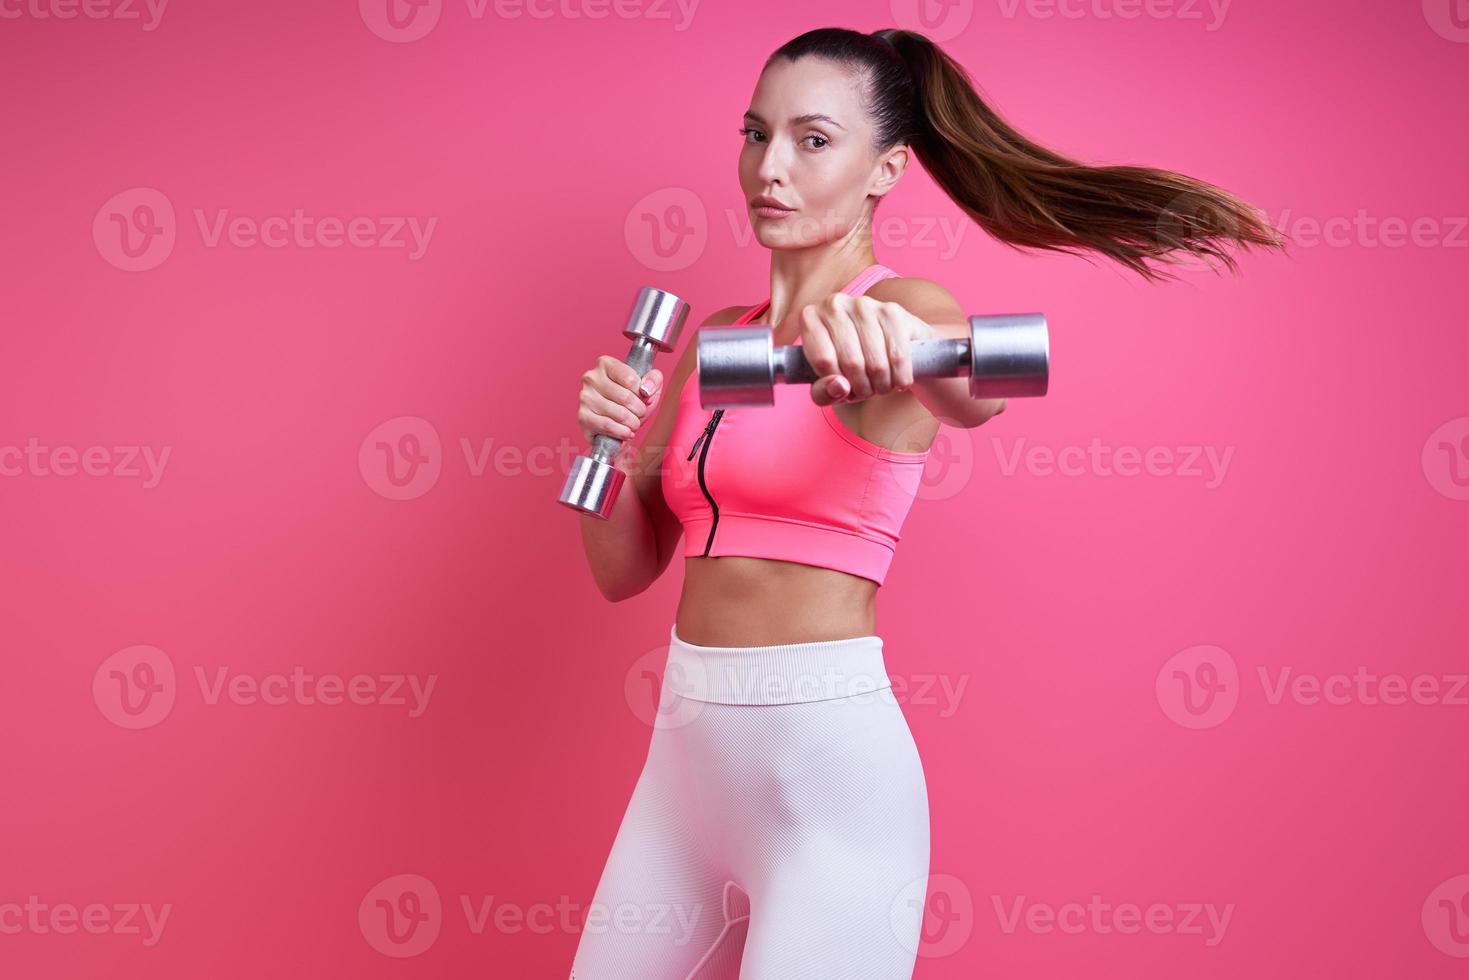 Confident young woman in sports clothing exercising with dumbbells against pink background photo